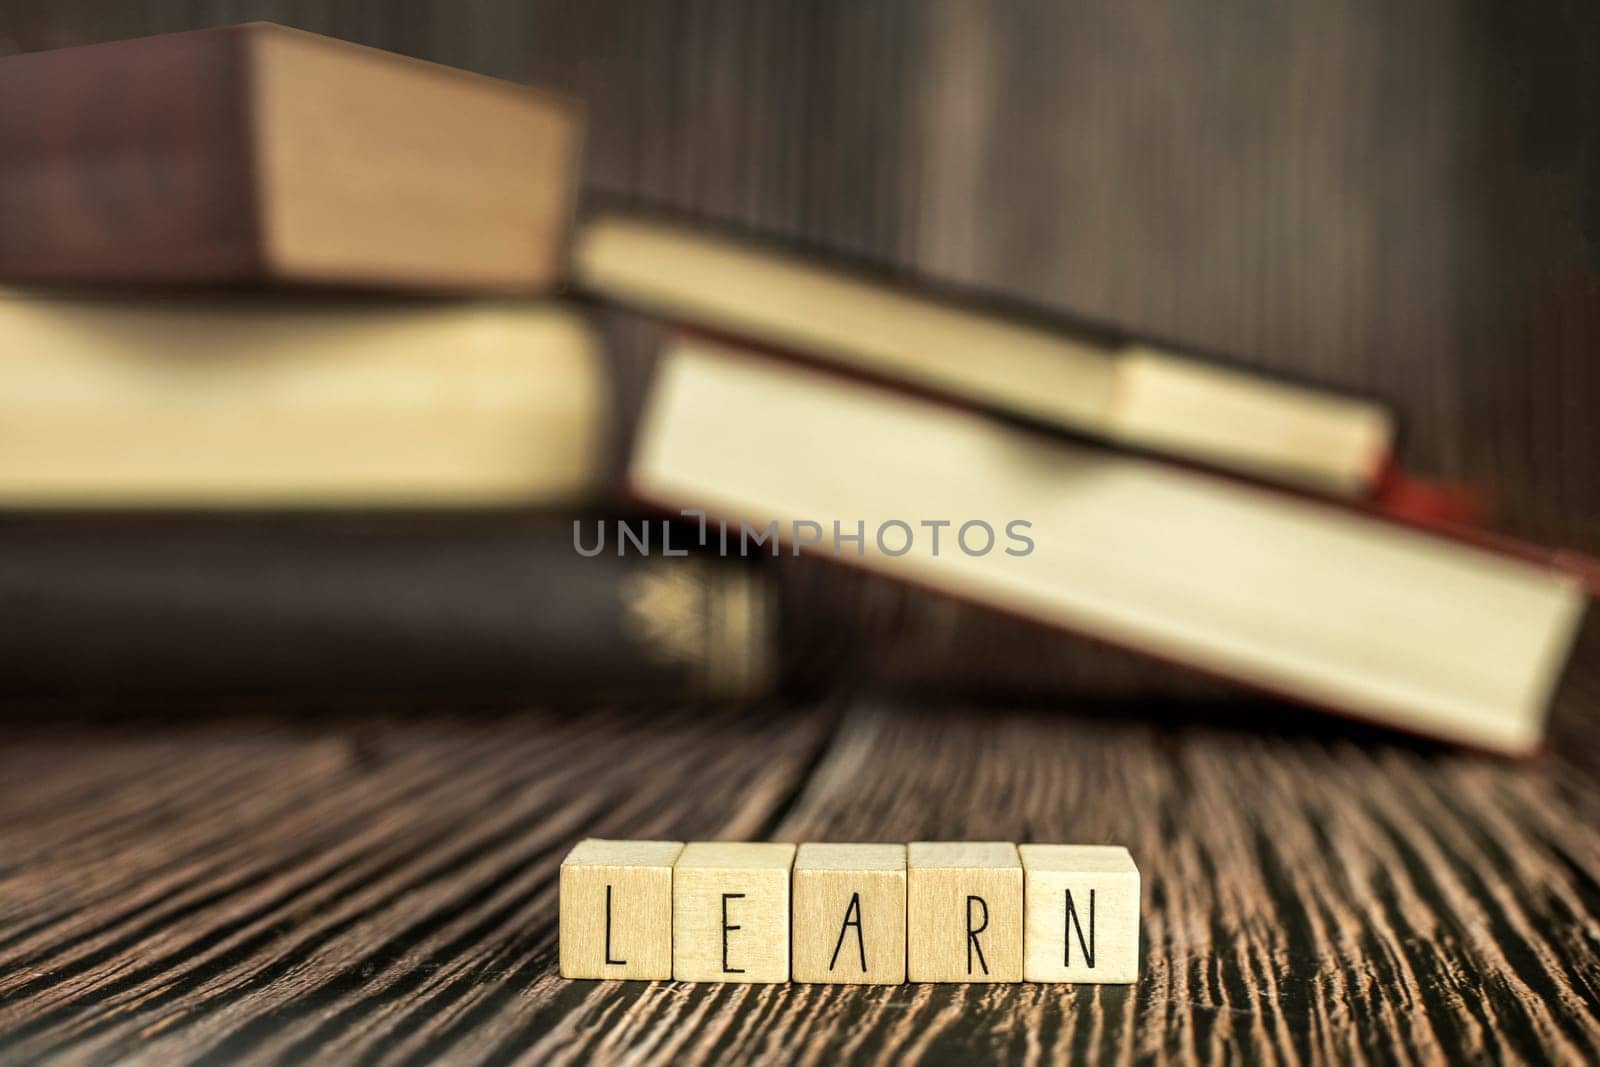 Pile of books, reading. Stack of books in the colored cover lay on the table. Open book with the text learn wooden background, education, reading, learning concept close up